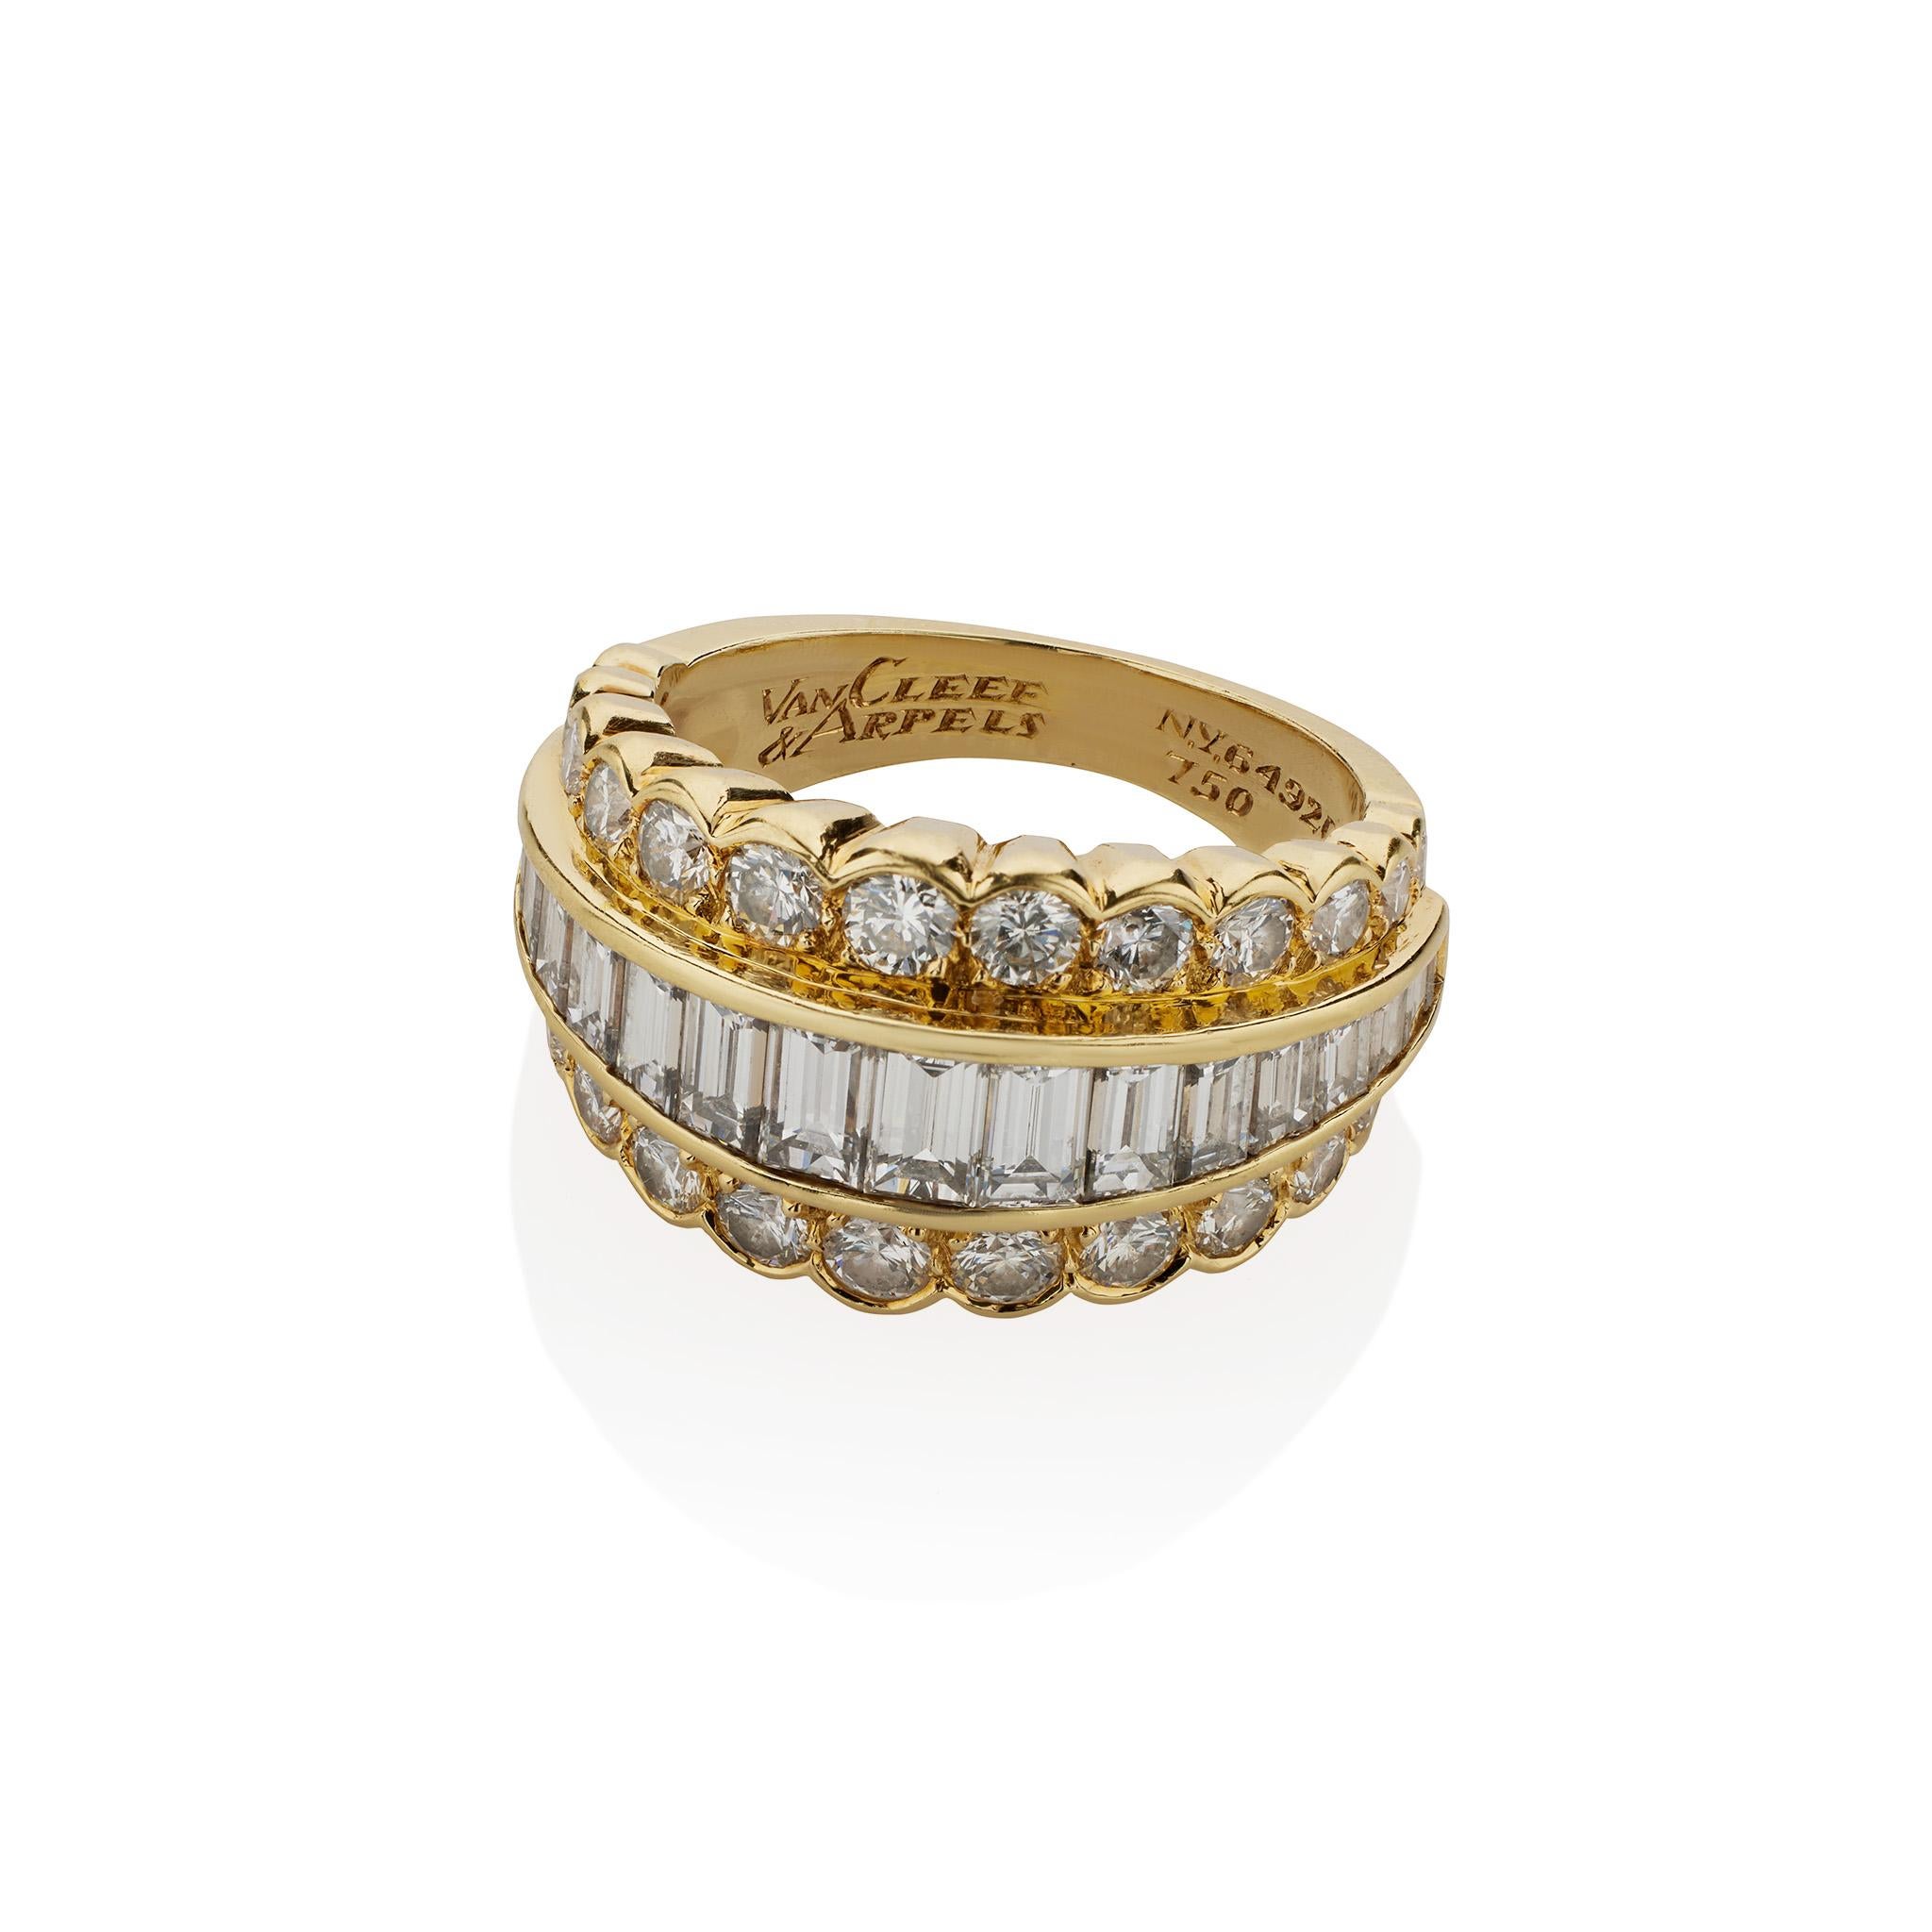 Created by Van Cleef & Arpels New York in the 1970s, this ring is composed of 18K gold and approximately 3.40 carats of diamonds. It is designed as a tapering channel-set line of baguette diamonds edged by round brilliant-cut diamonds. Sitting